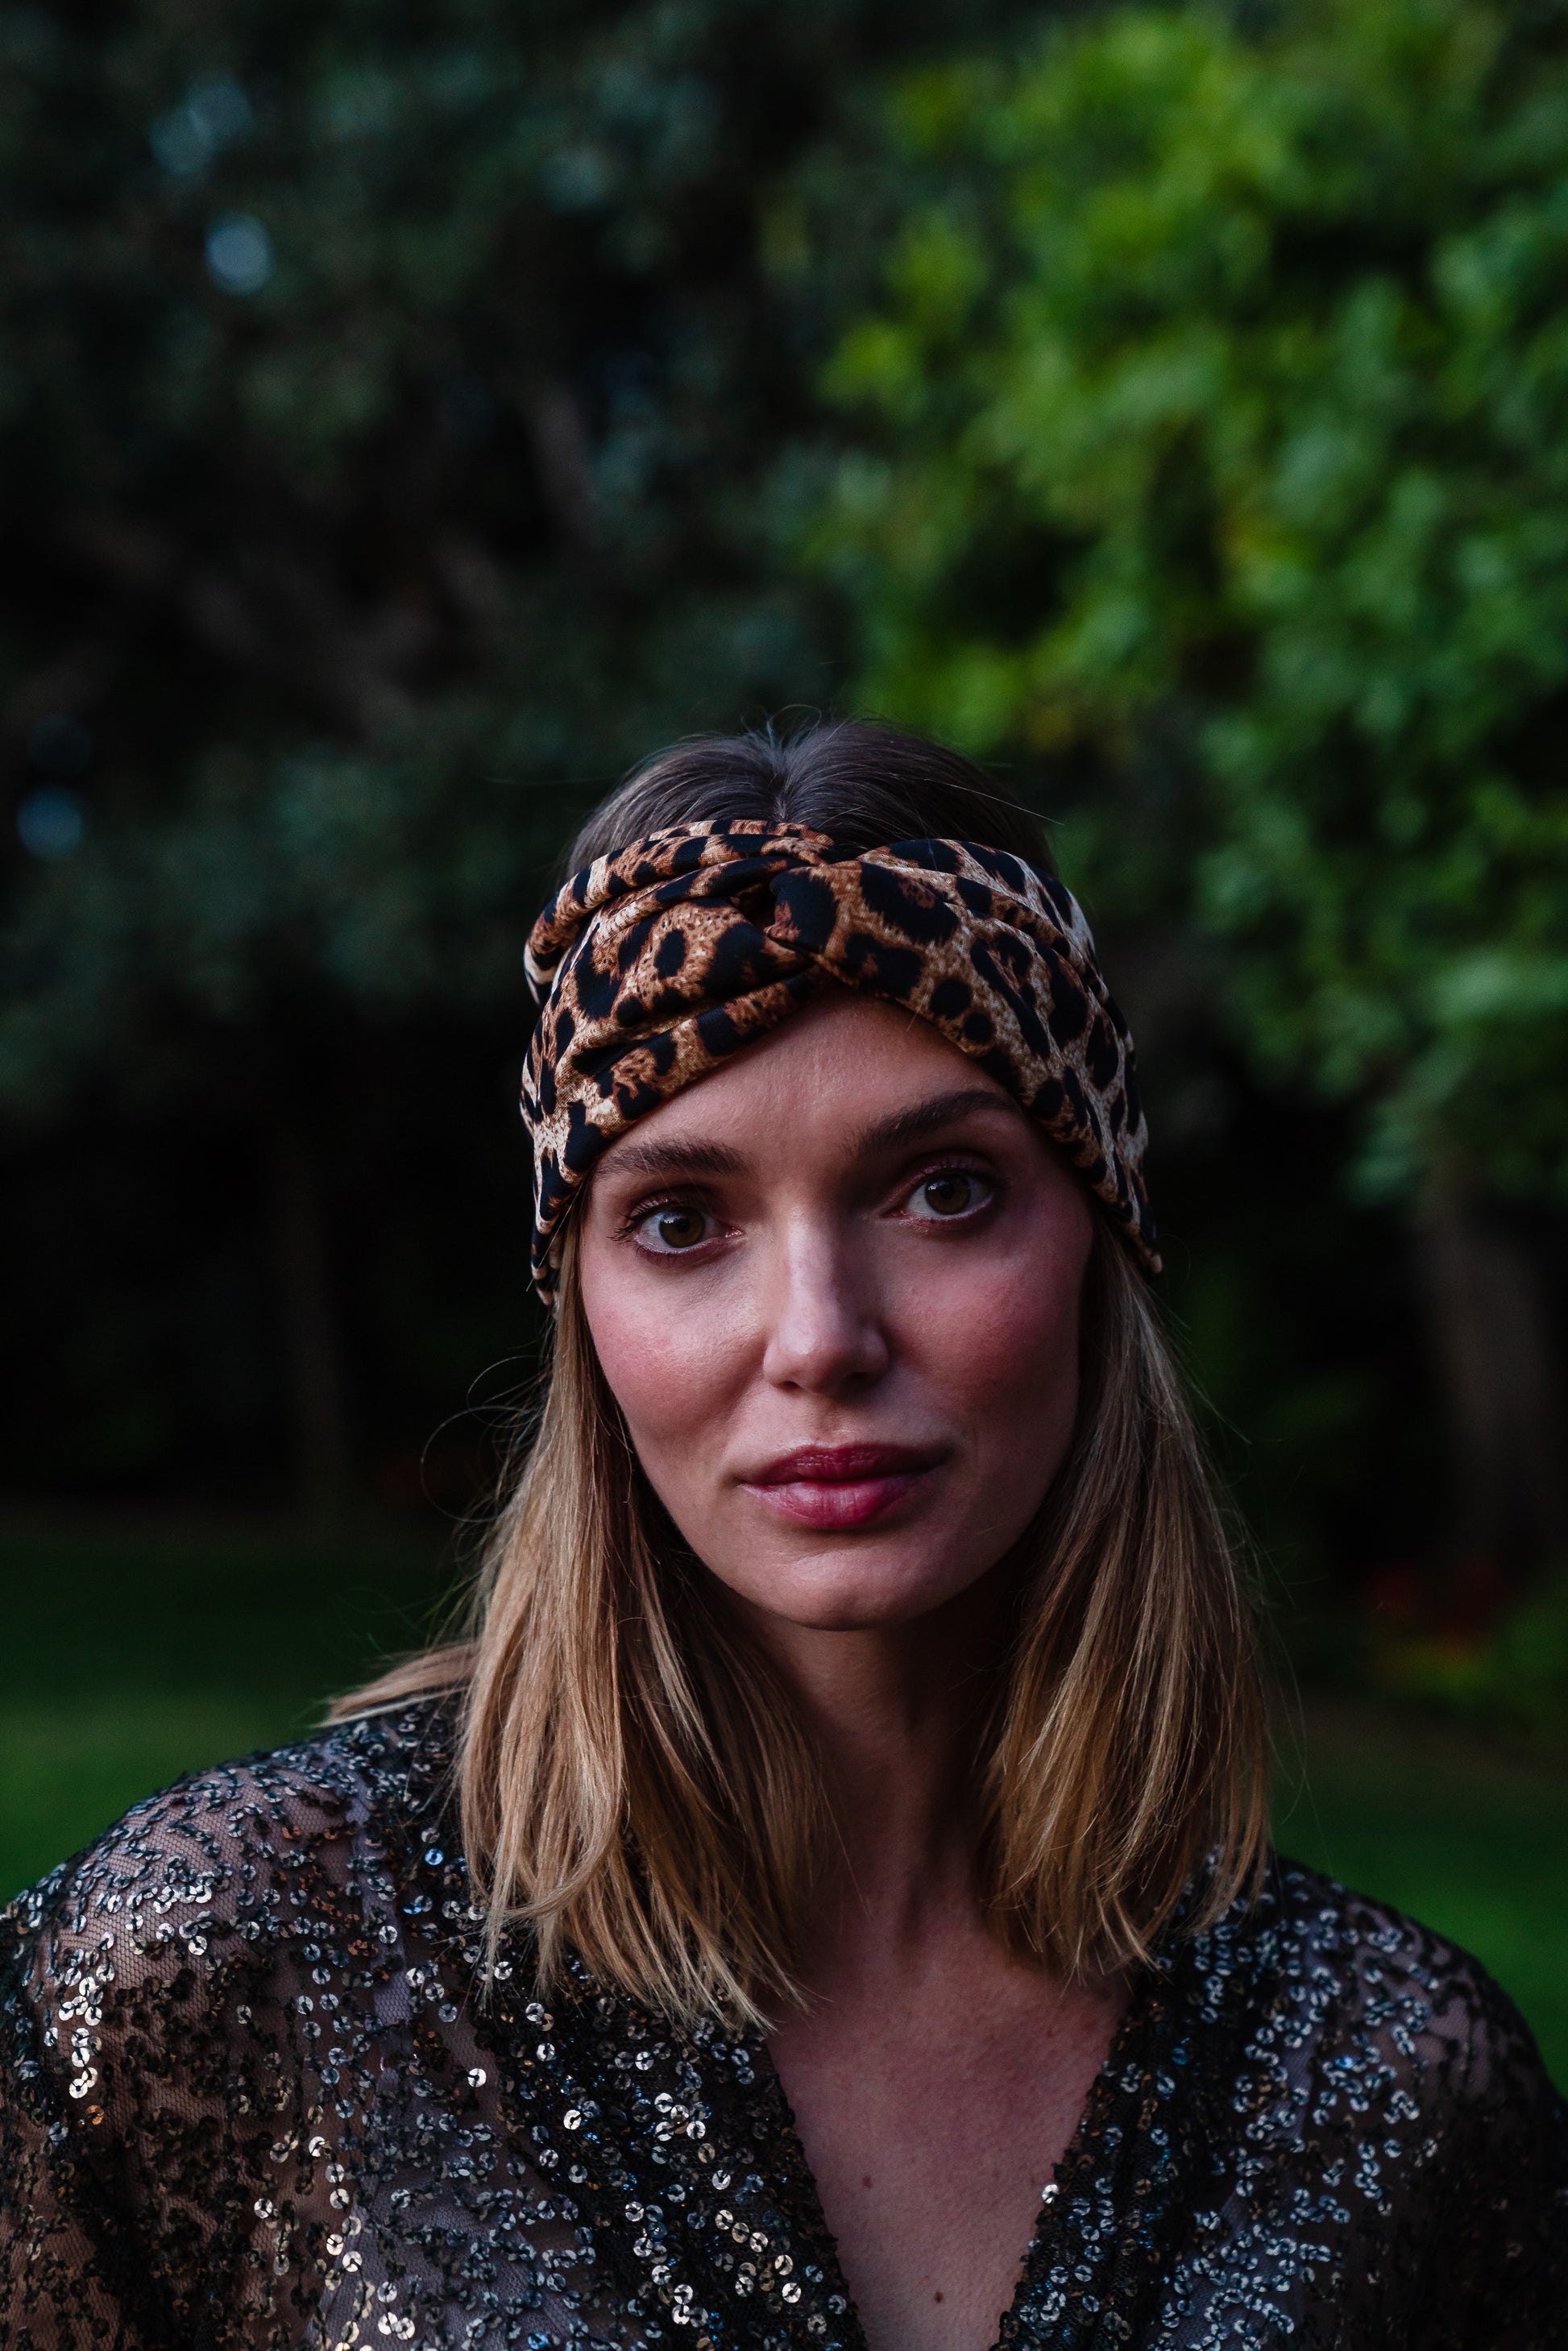 Jennafer Grace headband in leopard print. Headband is wide with twist detail in center. Easy to use to push back hair, or clip earrings on for a glamorous look. 